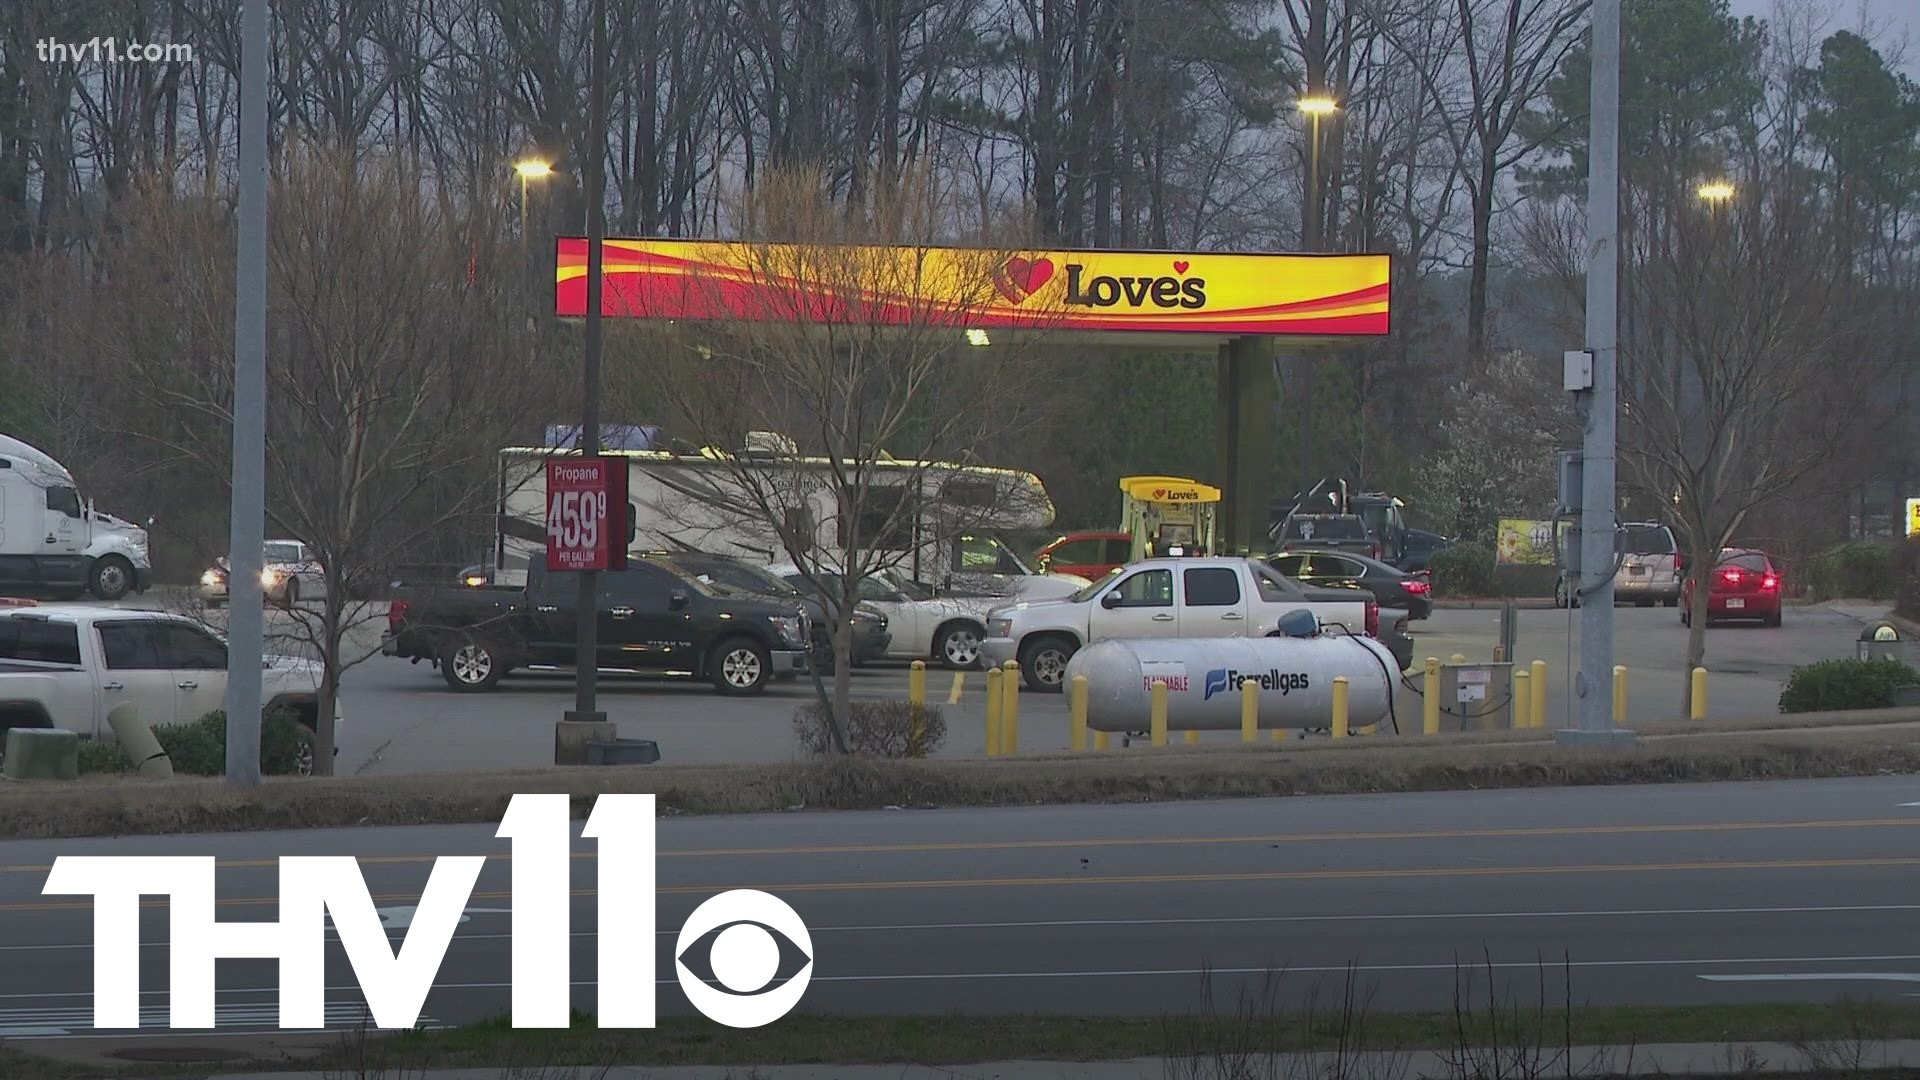 The Little Rock Police Department is investigating after the body of a deceased male was found in a vehicle parked at a Love's Truck Stop on Sunday afternoon.